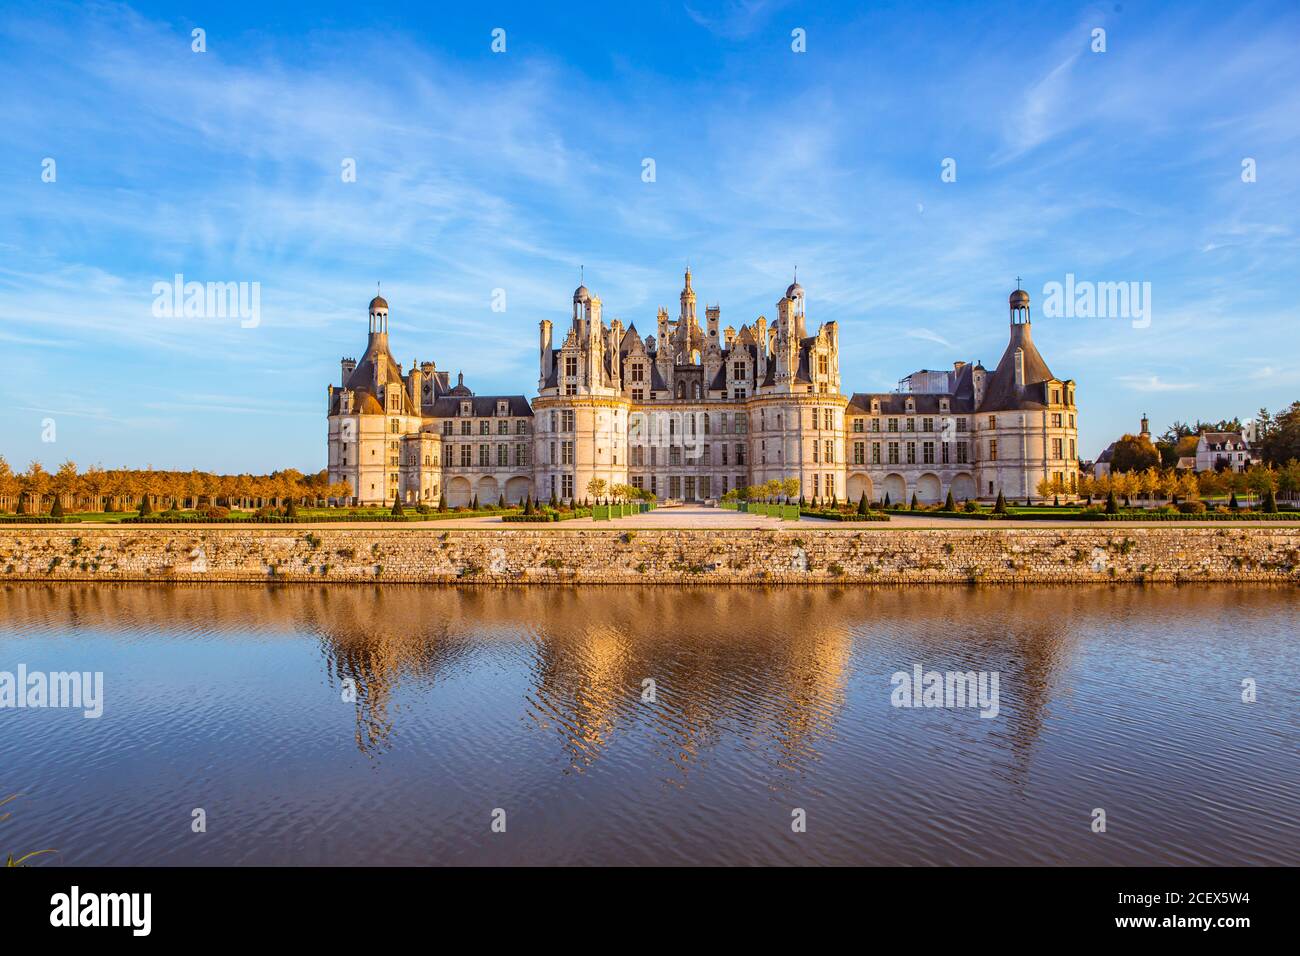 Chateau de Chambord, the royal castle in Loire Valley, France, at sunset. Stock Photo